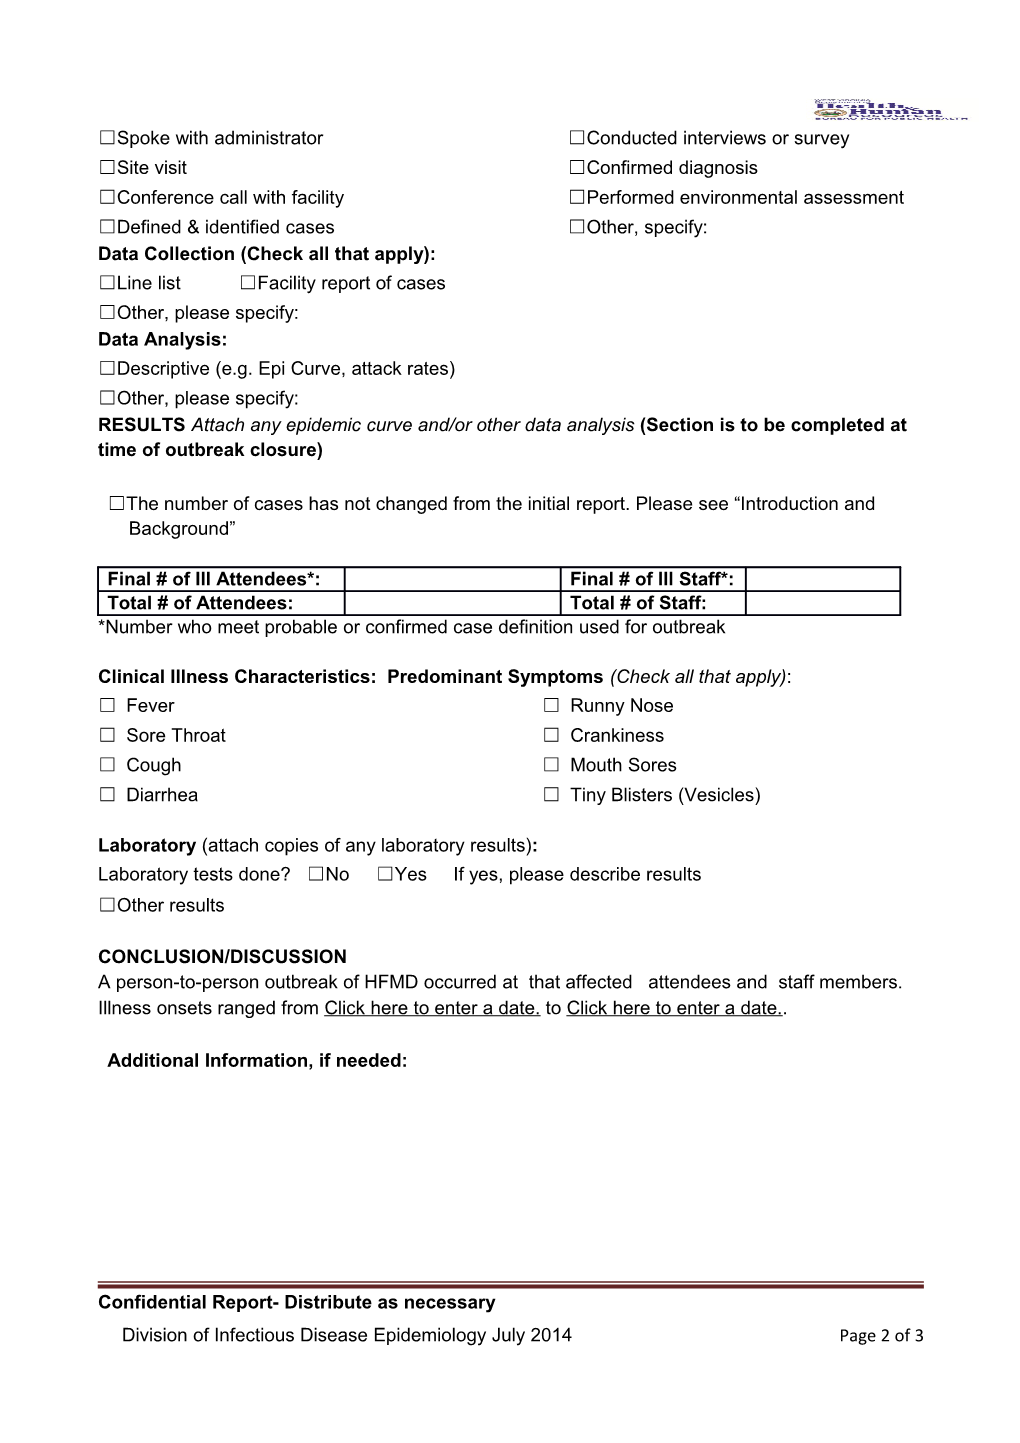 Hand, Foot, and Mouth Disease (HFMD) Outbreak Report Form